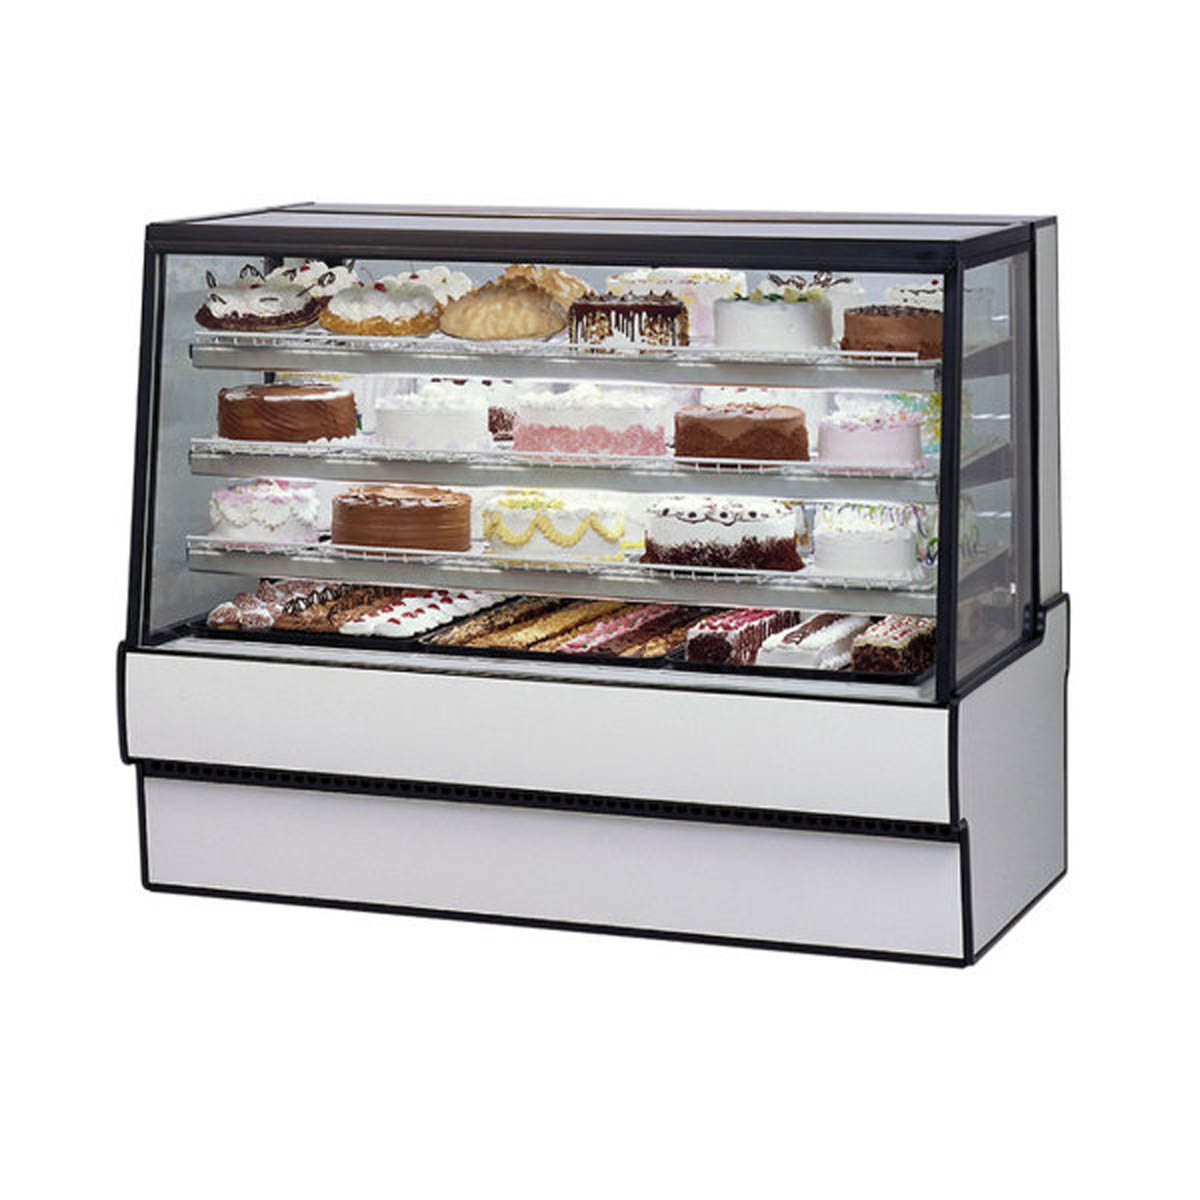 Federal Industries SGR3648 36" High Volume Refrigerated Bakery Display Case